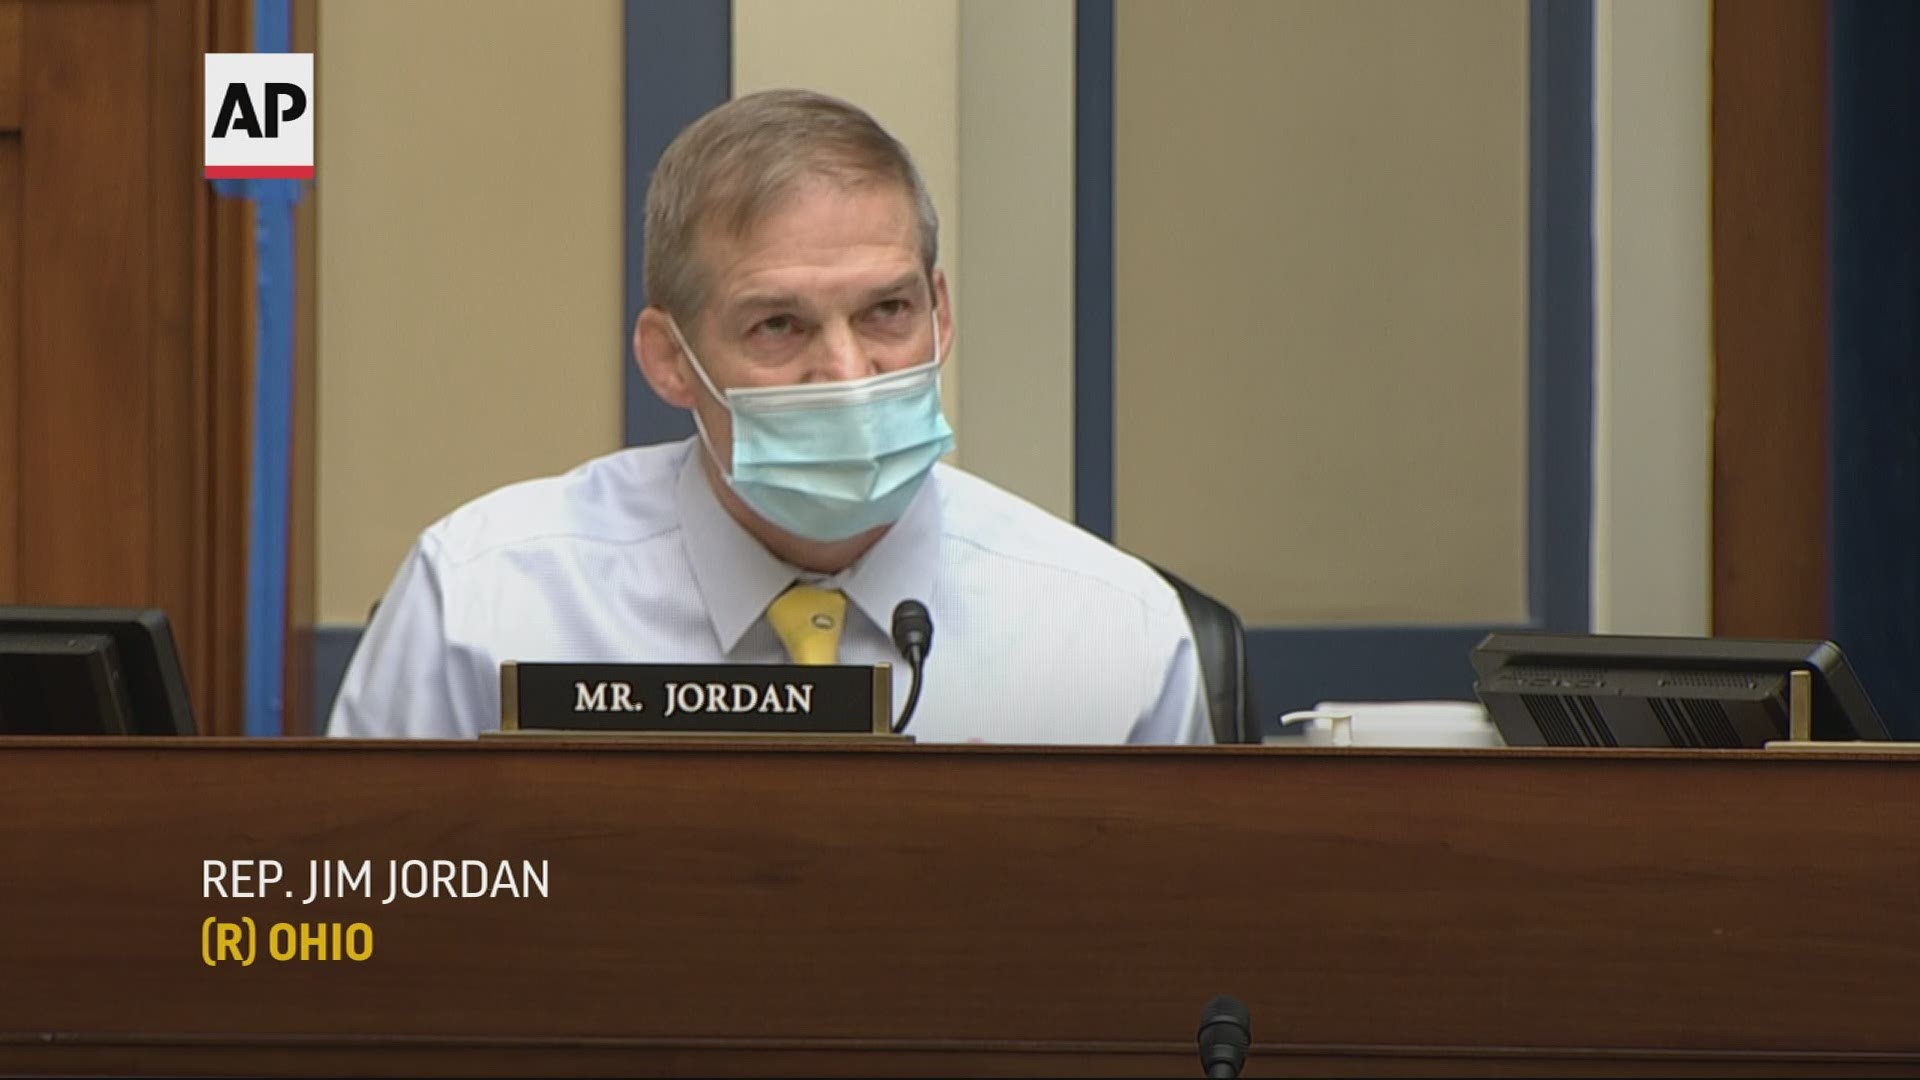 The nation’s top infectious disease expert clashed with Rep. Jim Jordan Thursday over what it will take for the country to reopen more amid COVID-19 pandemic.